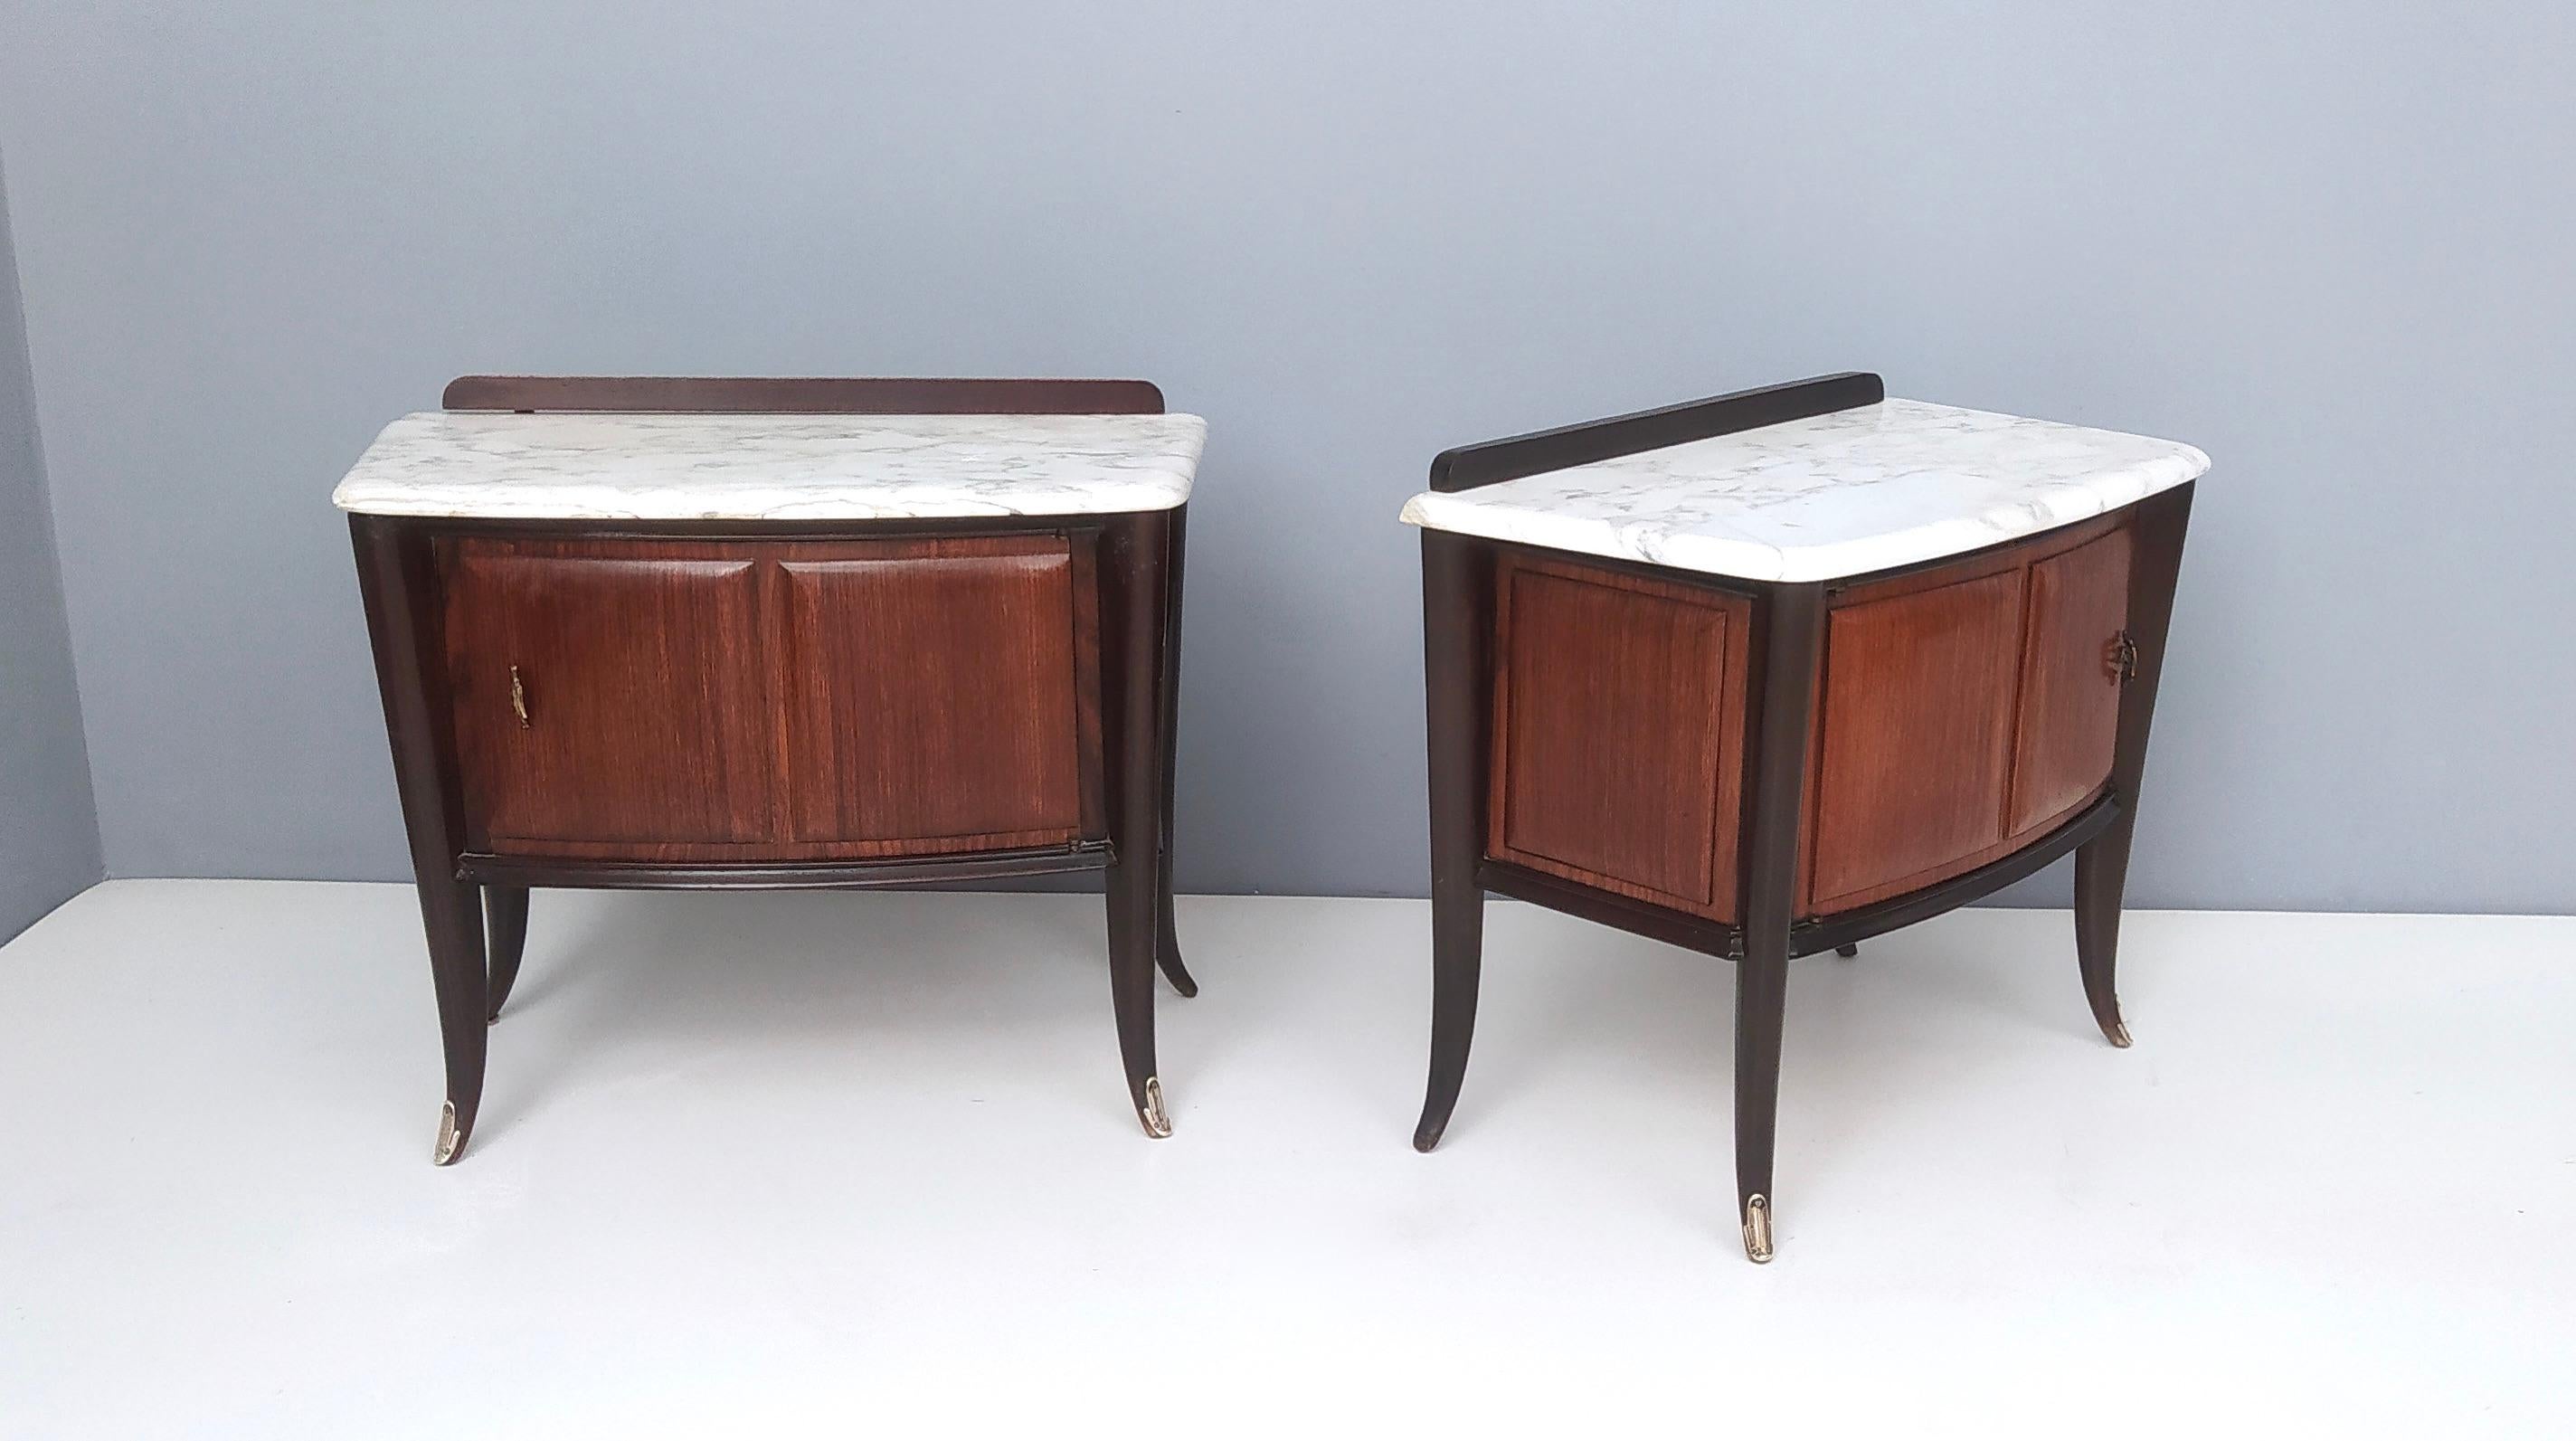 Italian Pair of Vintage Walnut Nightstands Produced by Dassi with Carrara Marble Top